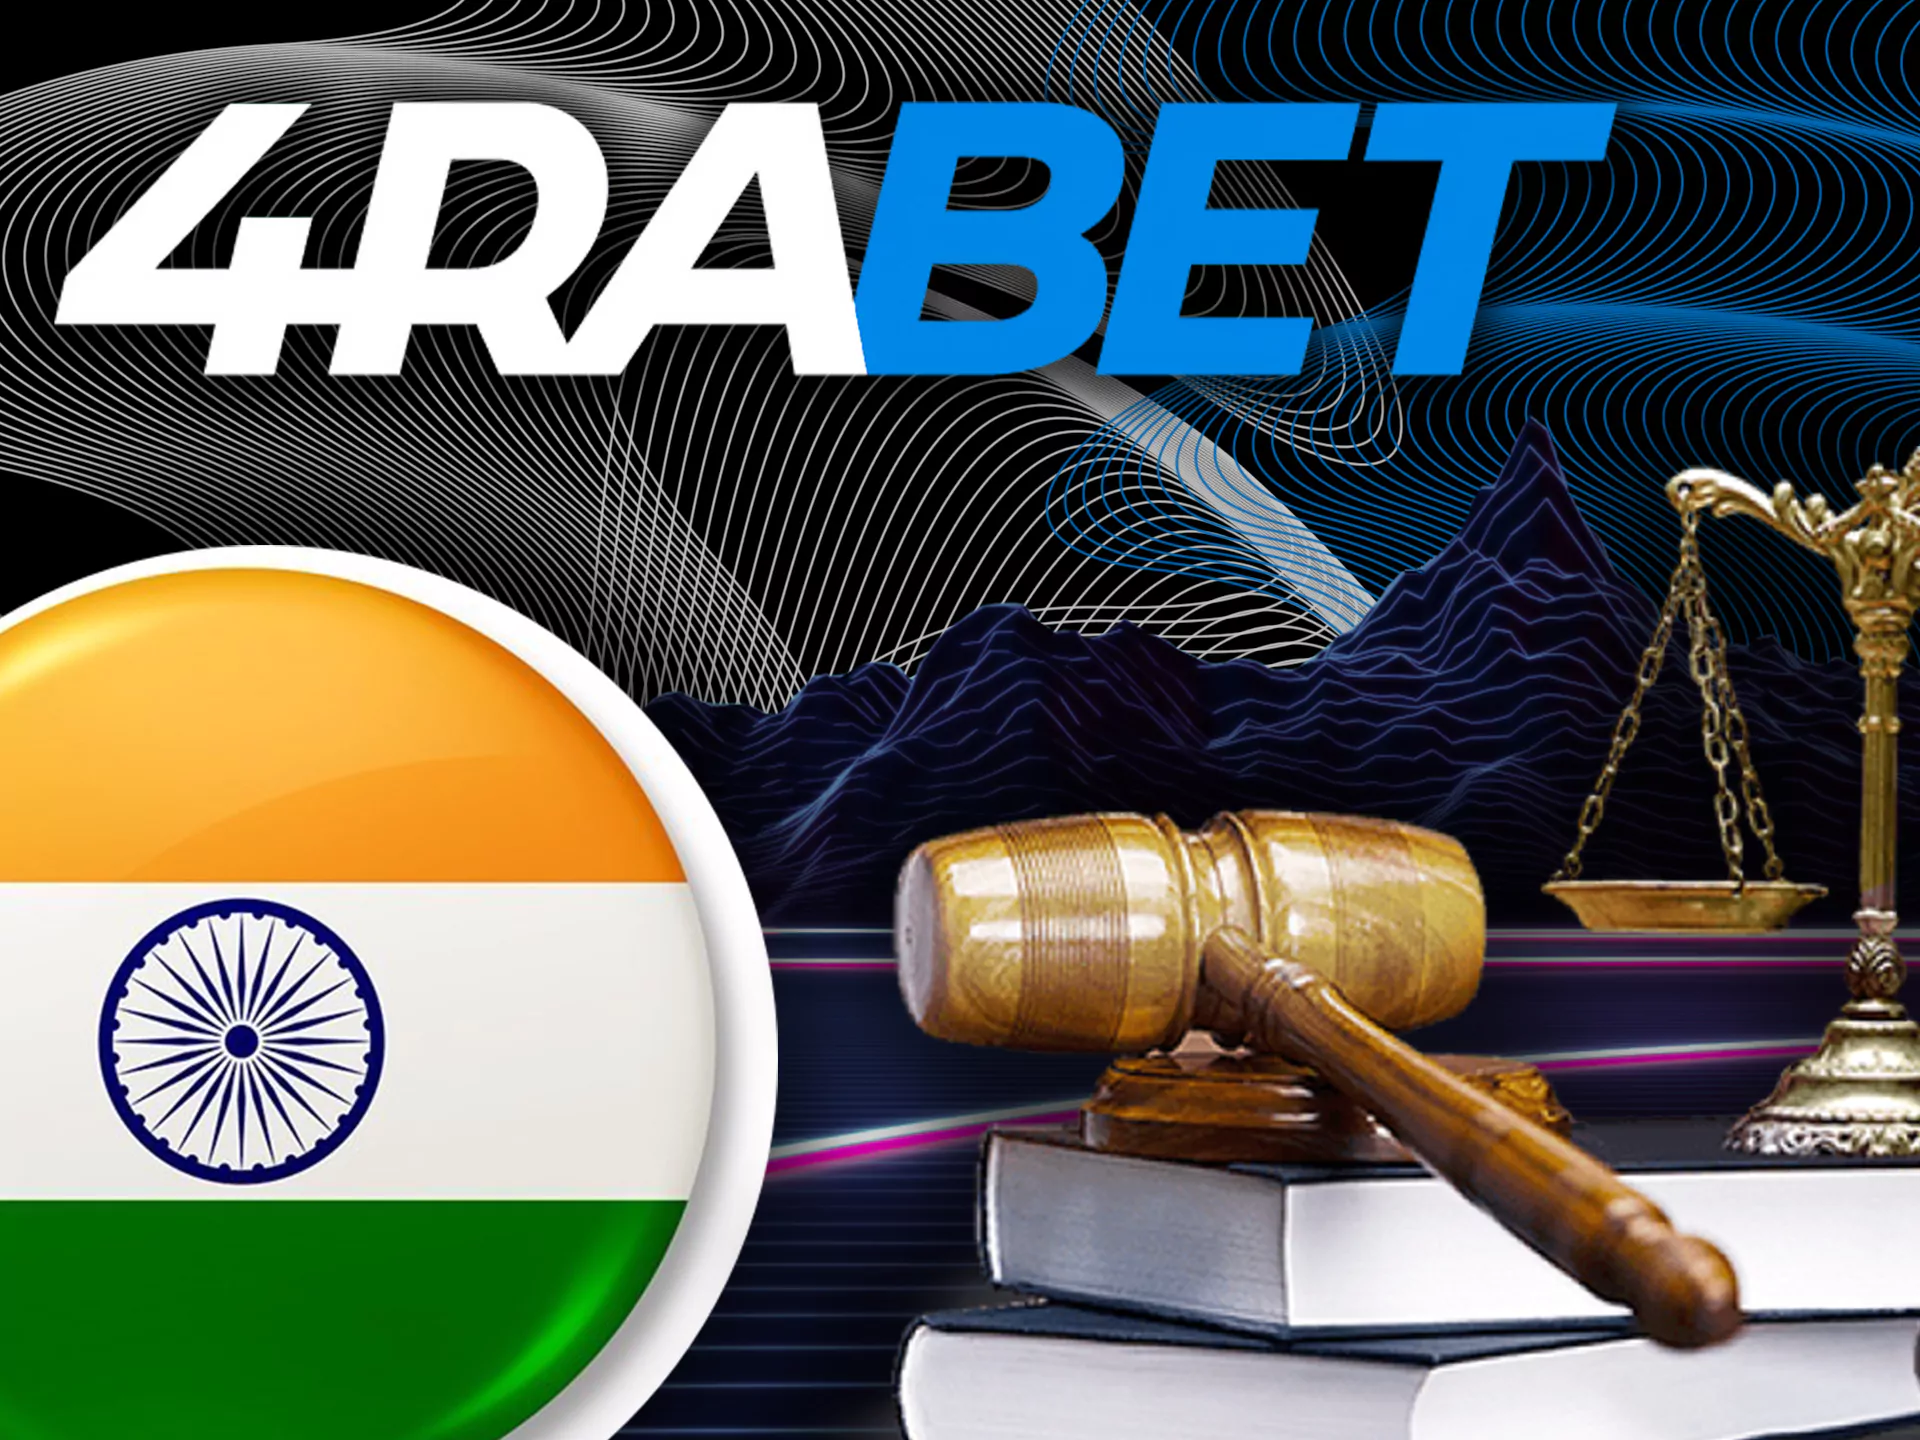 4rabet is a legal and offiical online betting and casino site in India, licensed by Curacao.